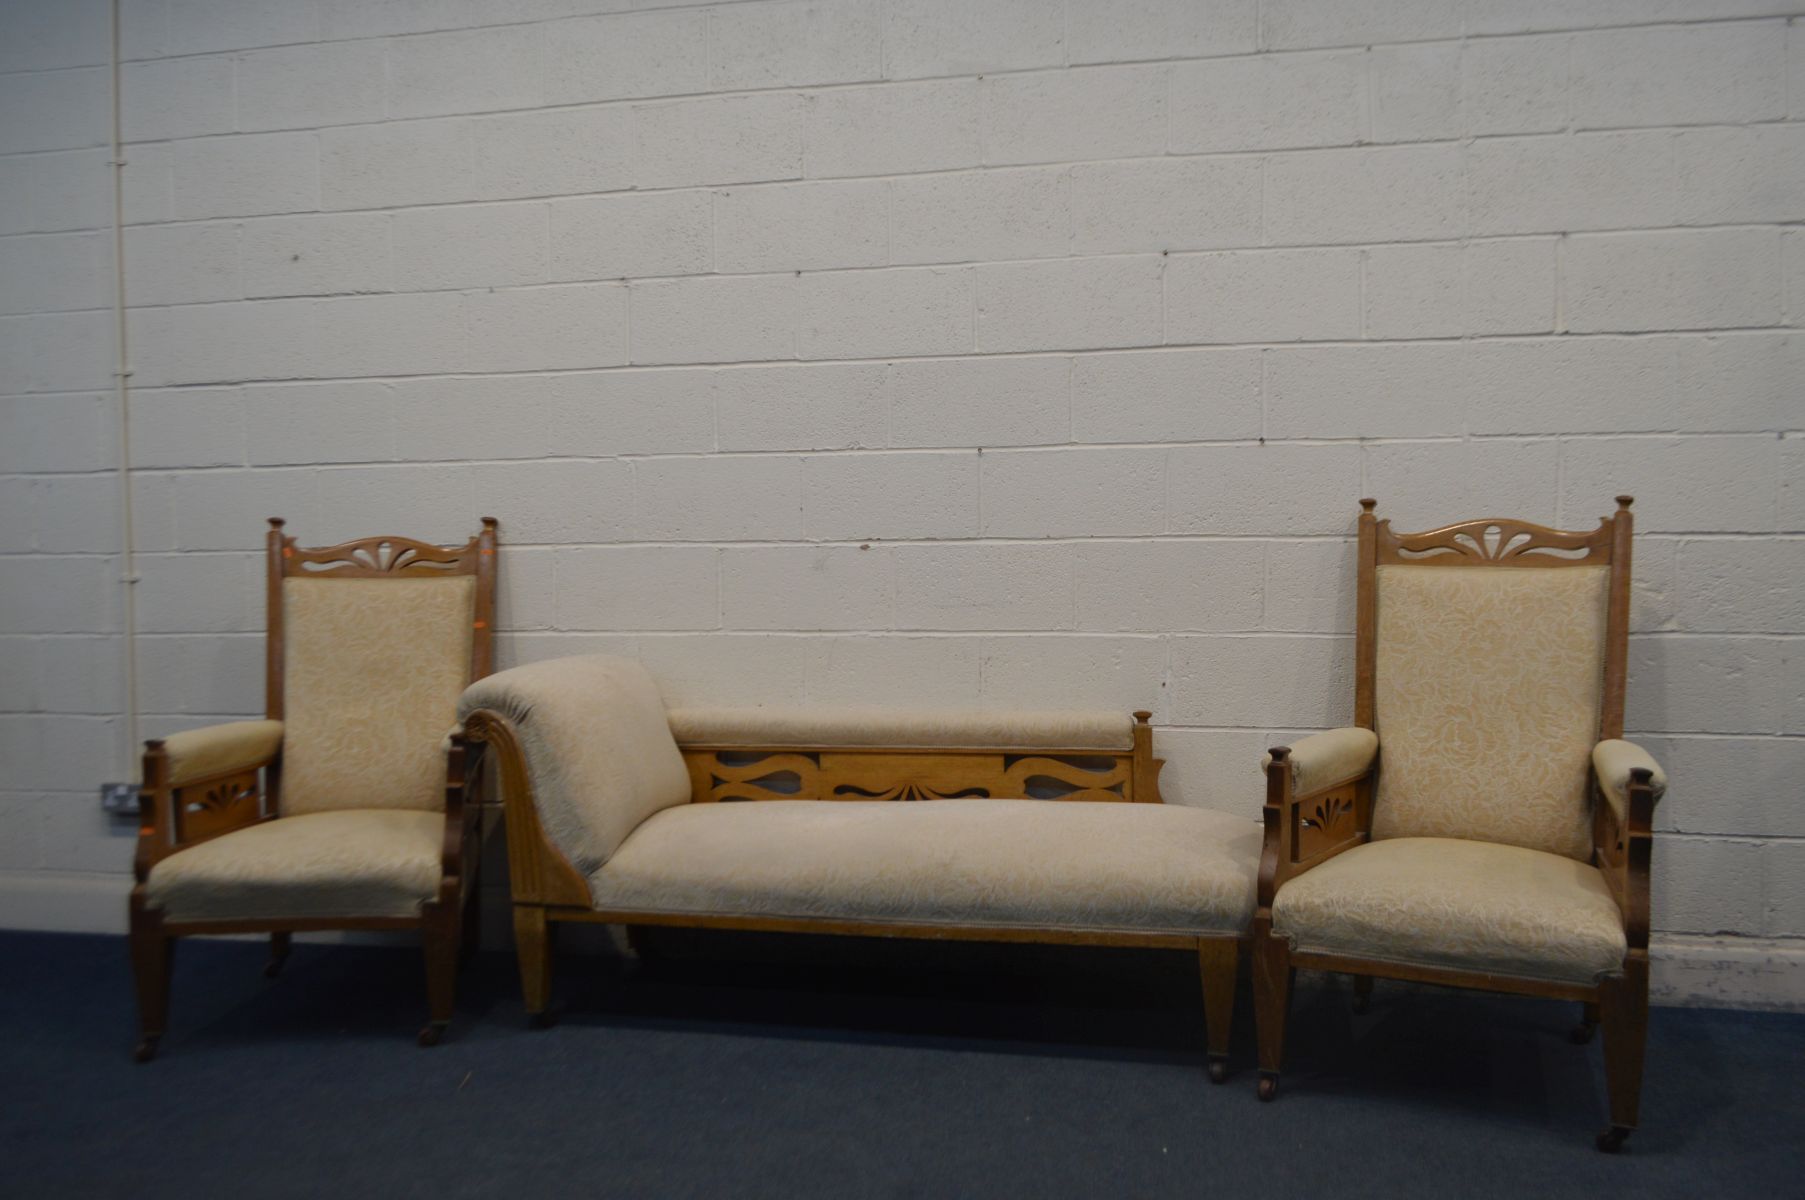 AN EARLY 20TH CENTURY GOLDEN OAK THREE PIECE SUITE PARLOUR SUITE, with foliate upholstery,